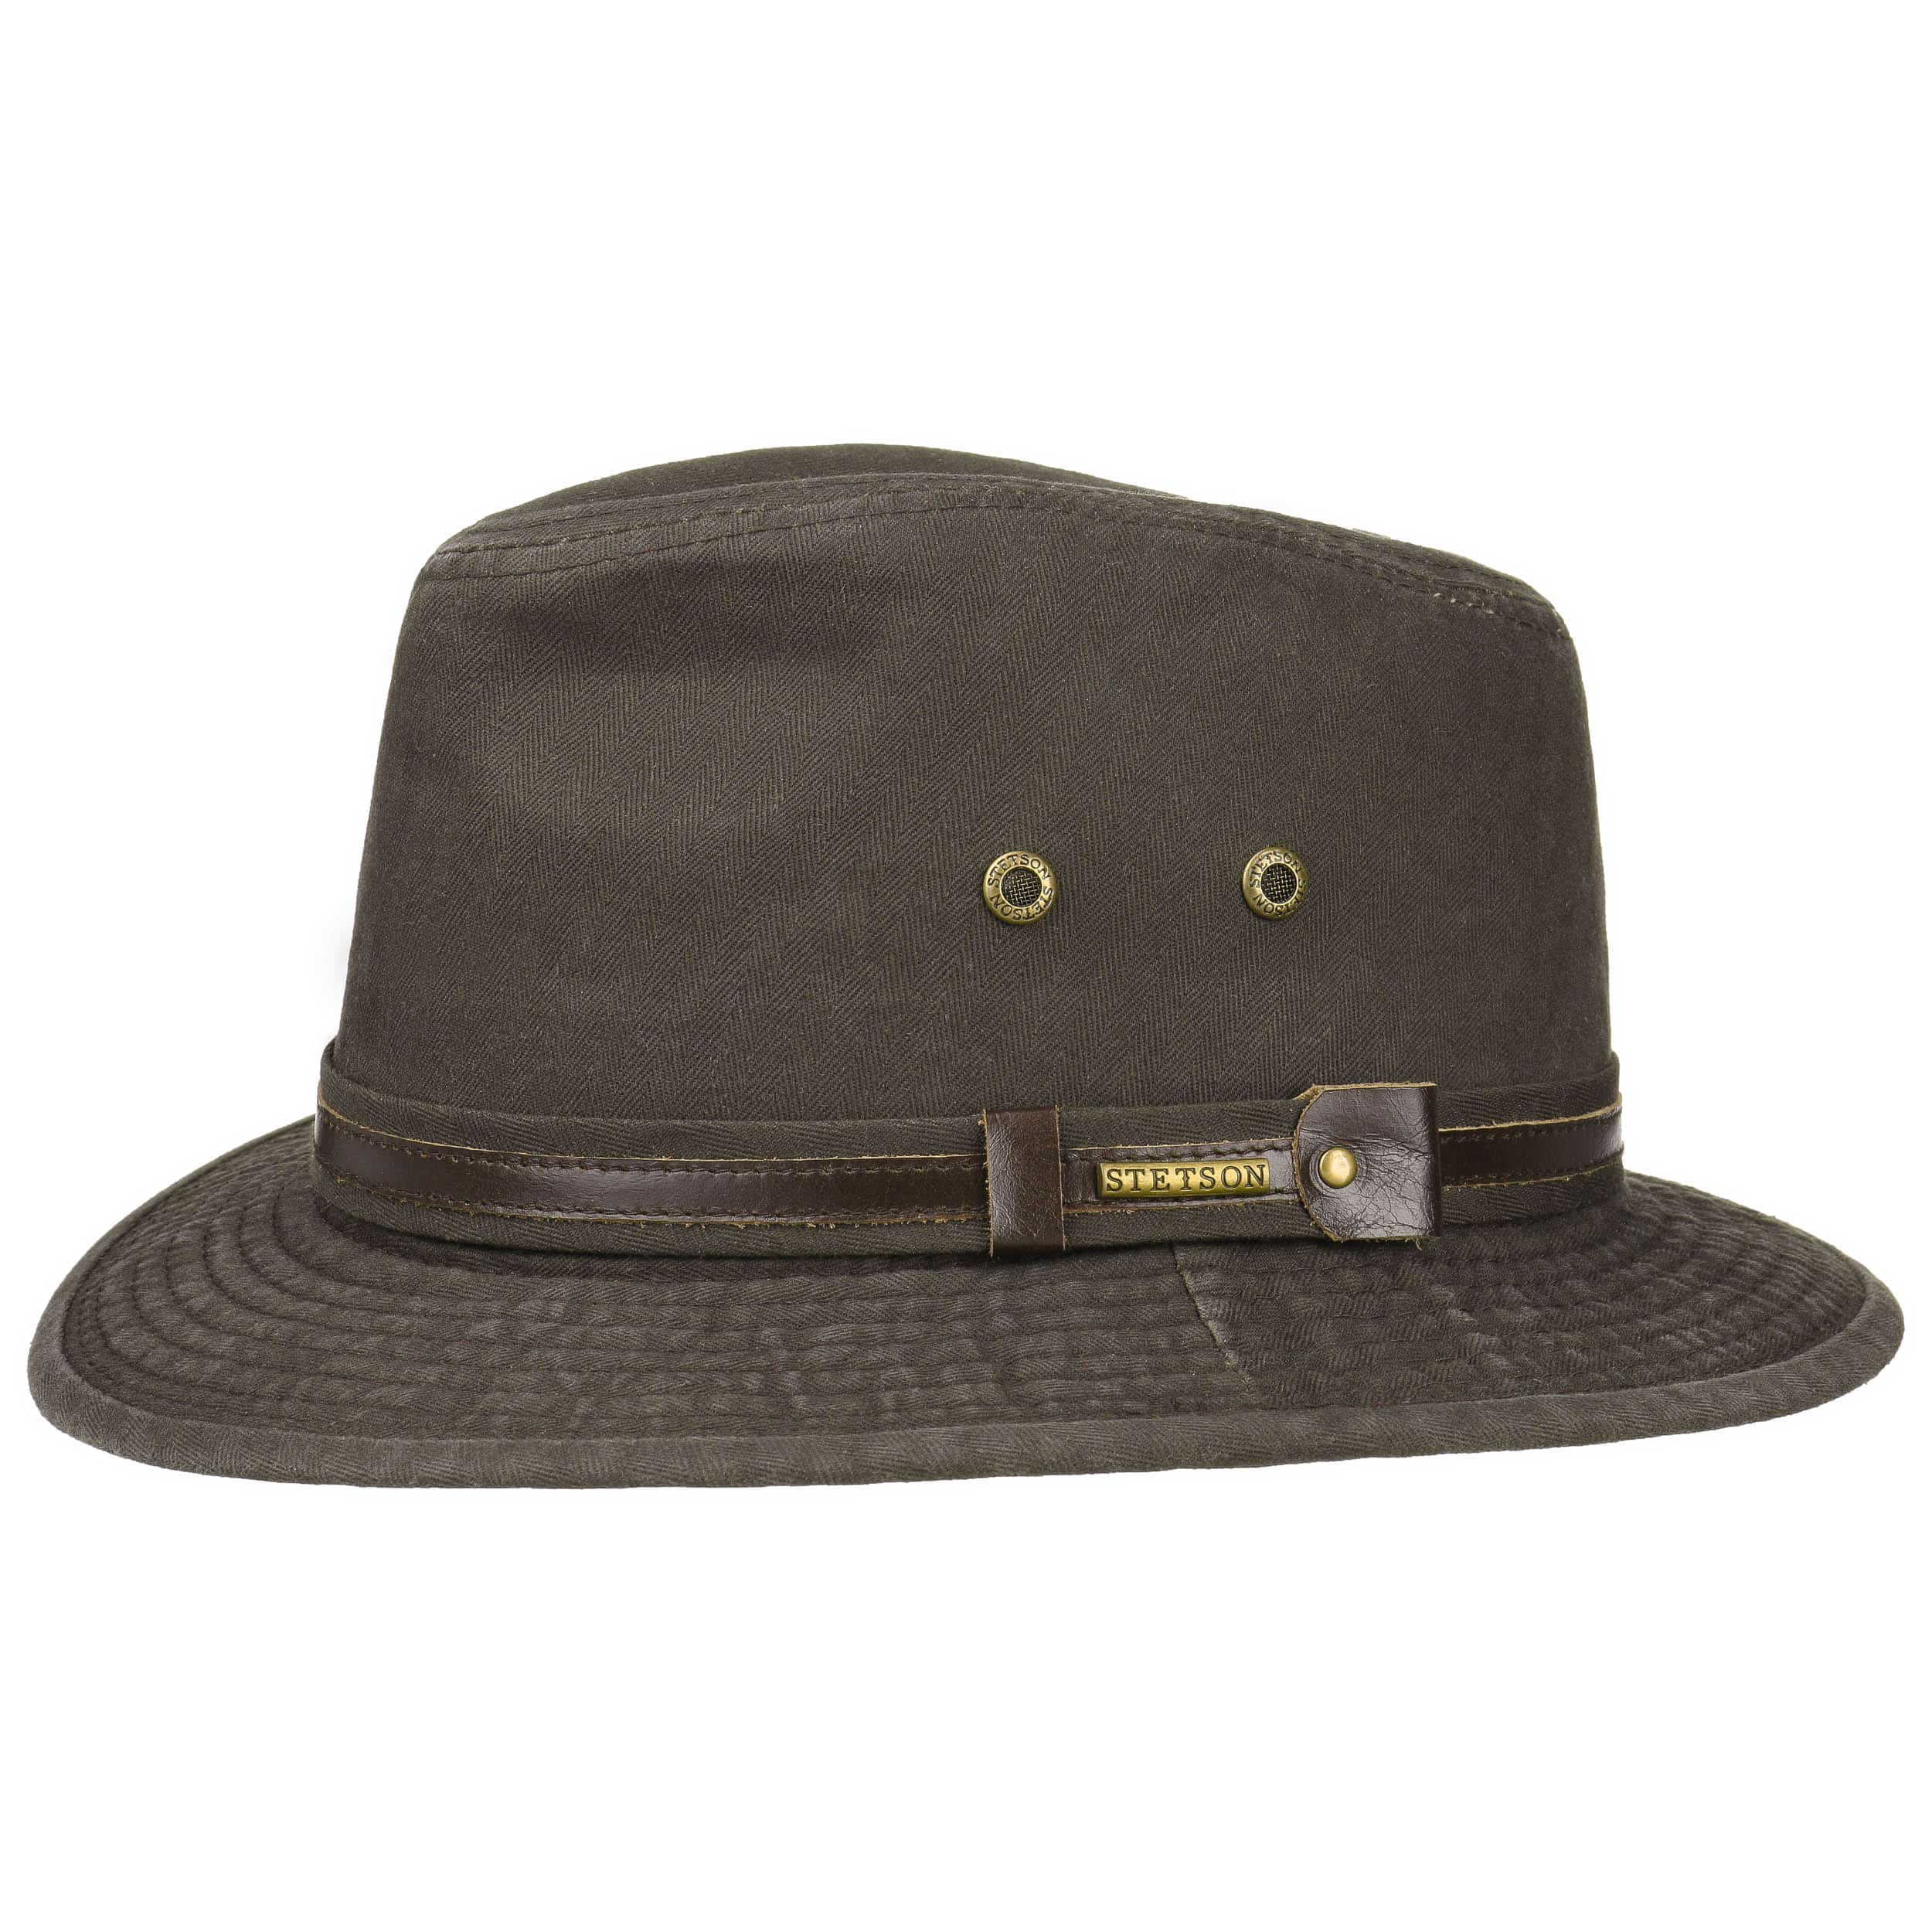 Classic Cotton Traveller Hat by Stetson - 59,00